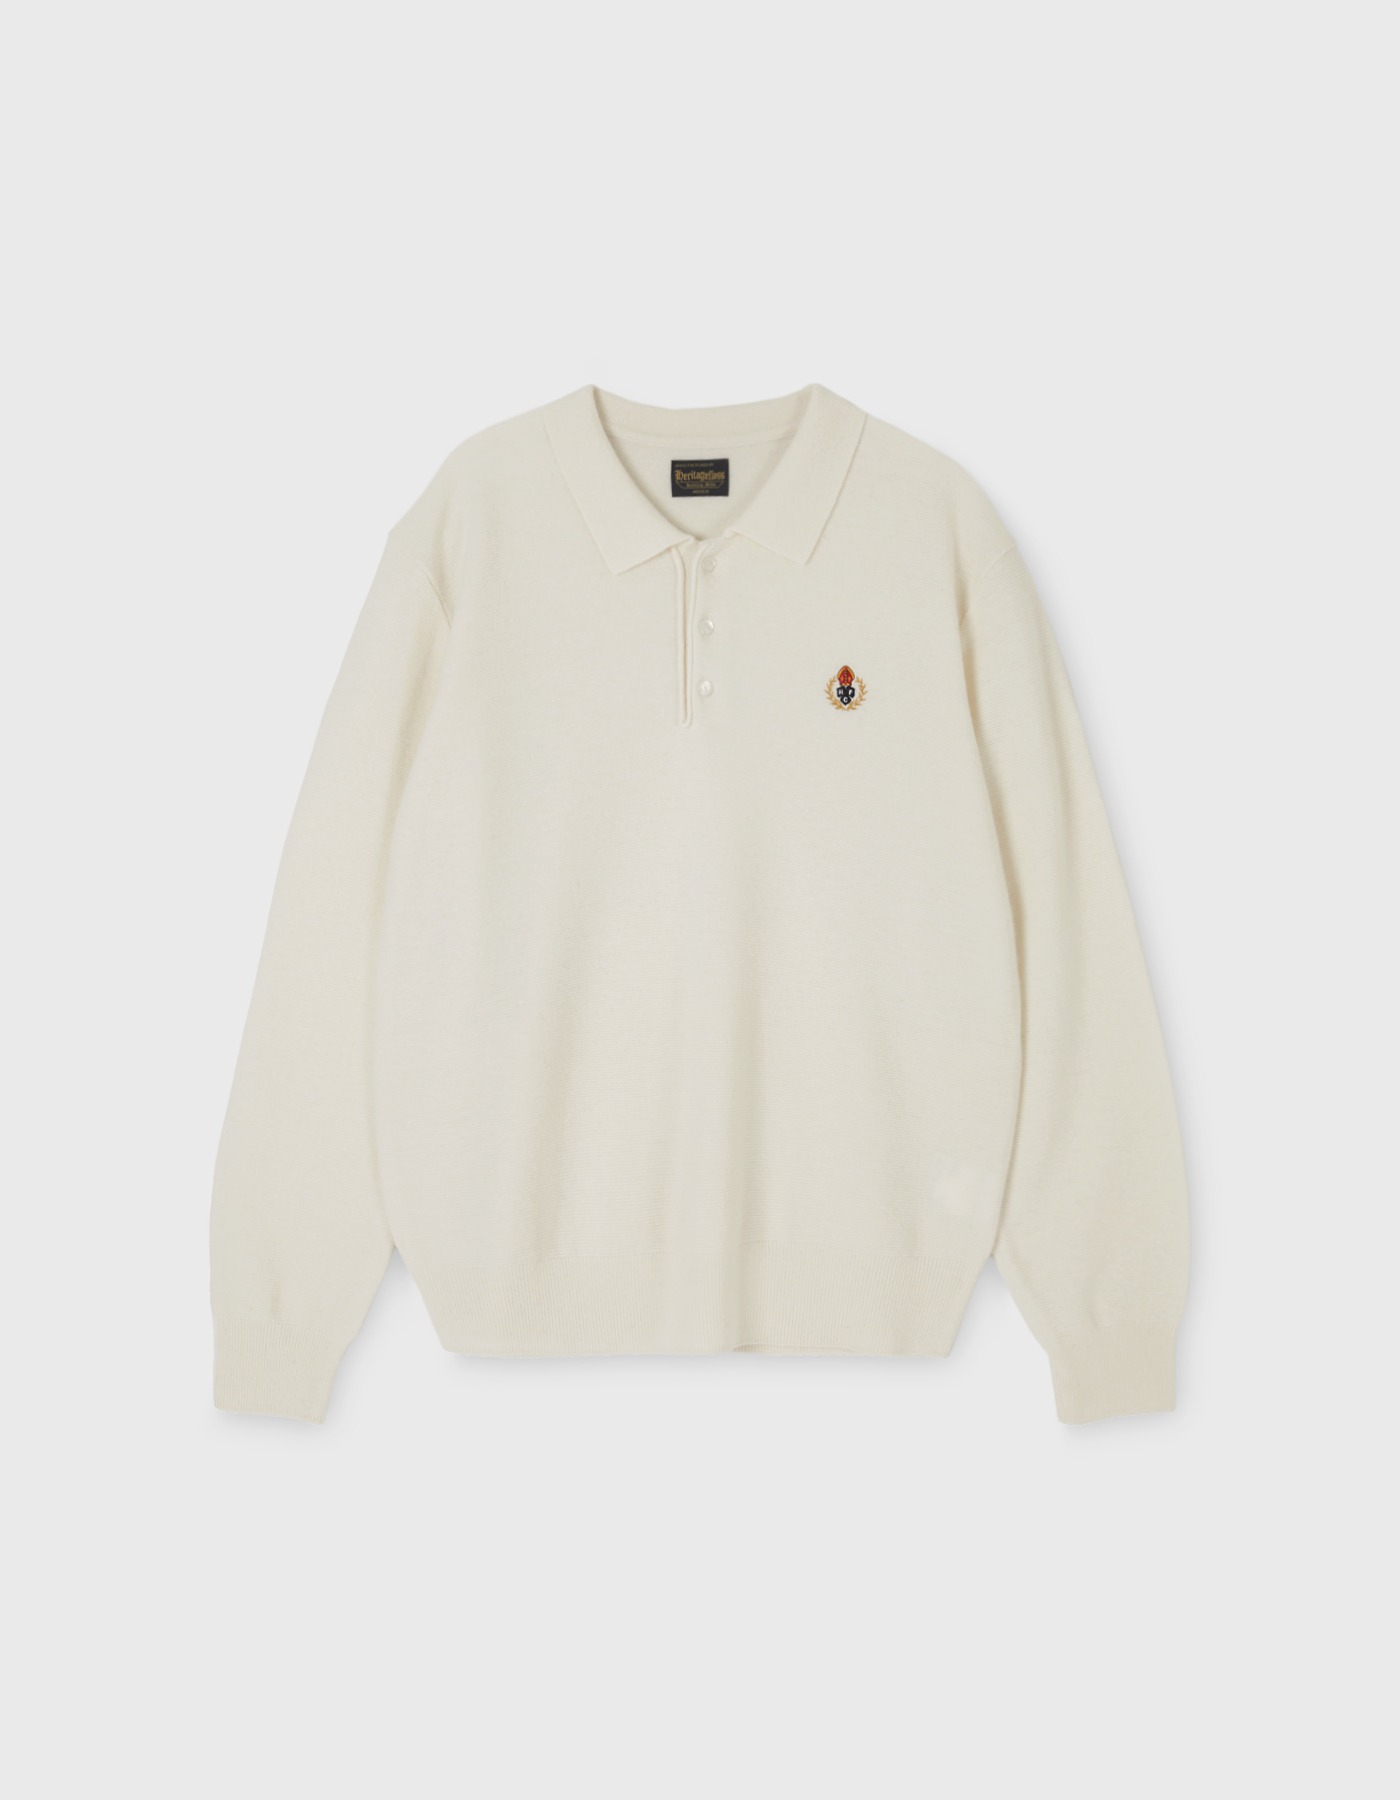 CREST WOOL POLO SHIRT / Ivory